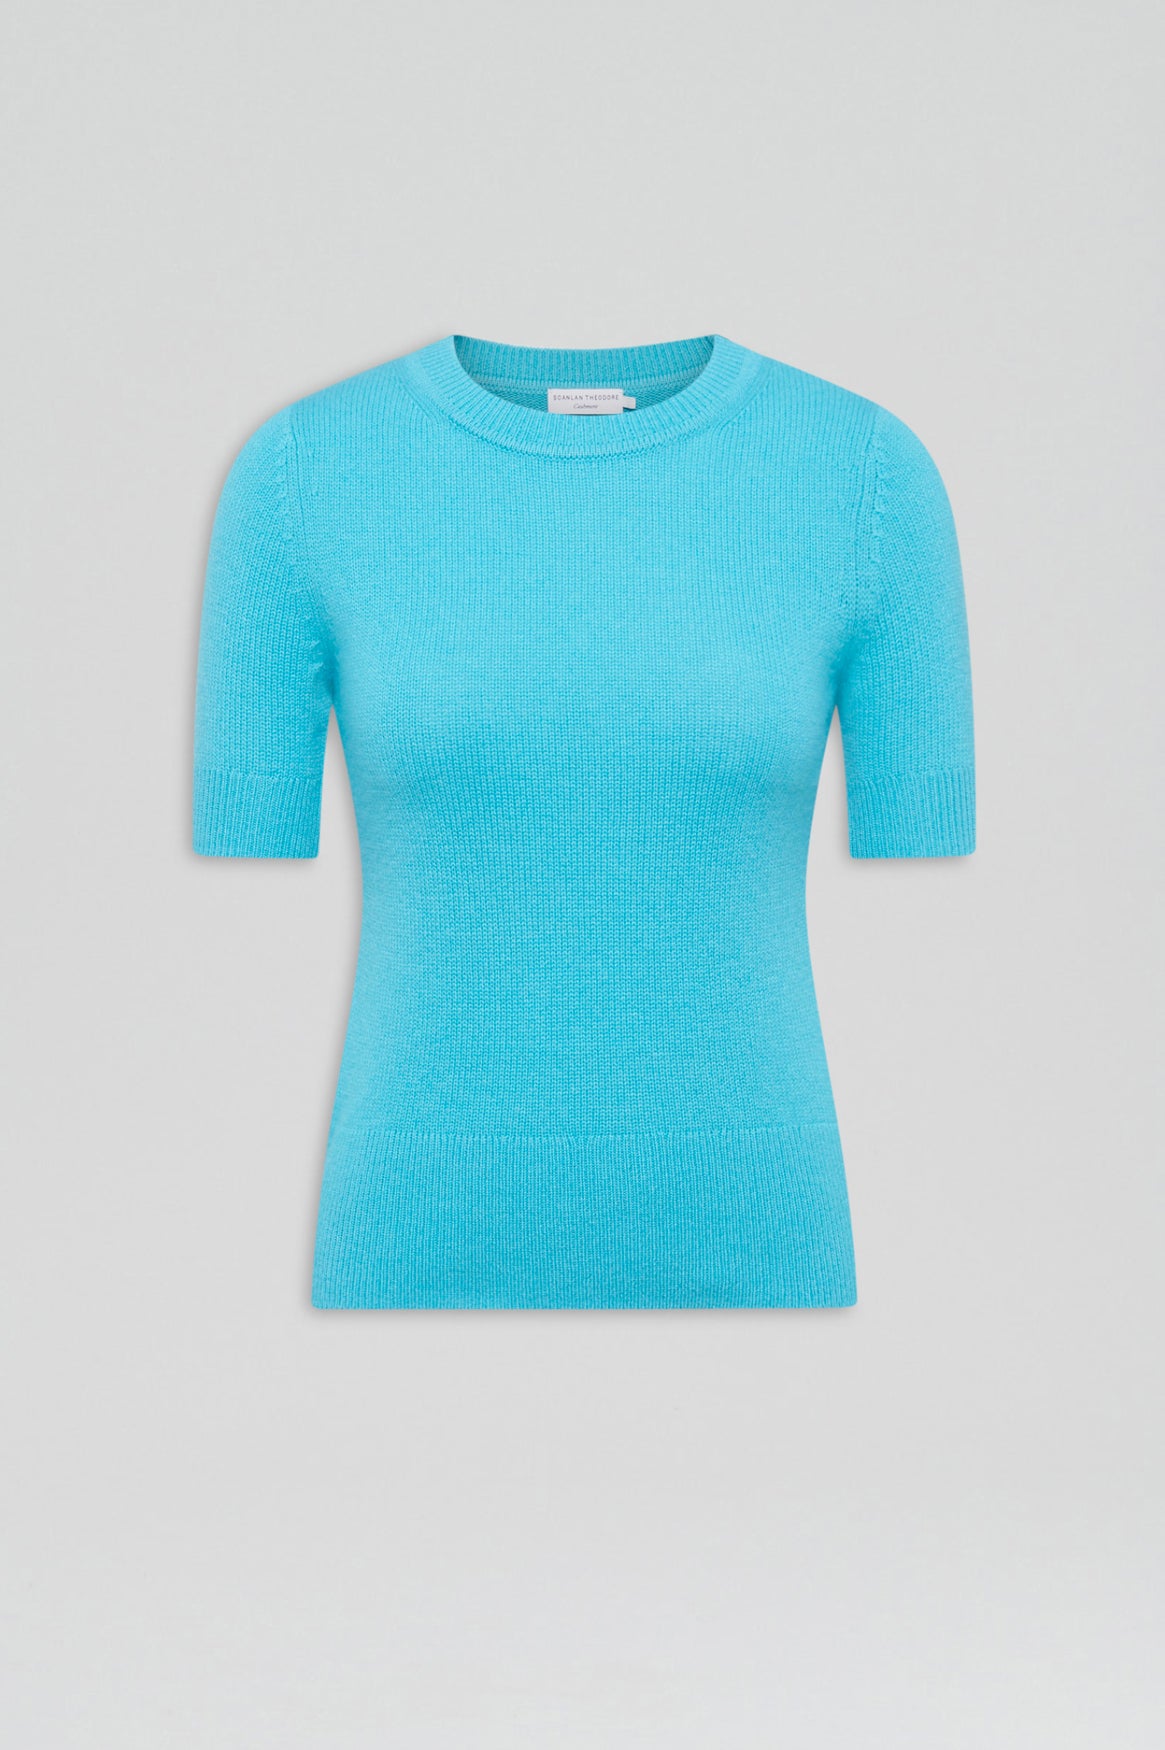 CASHMERE SLIM FIT SWEATER 5 - TURQUOISE - Scanlan Theodore